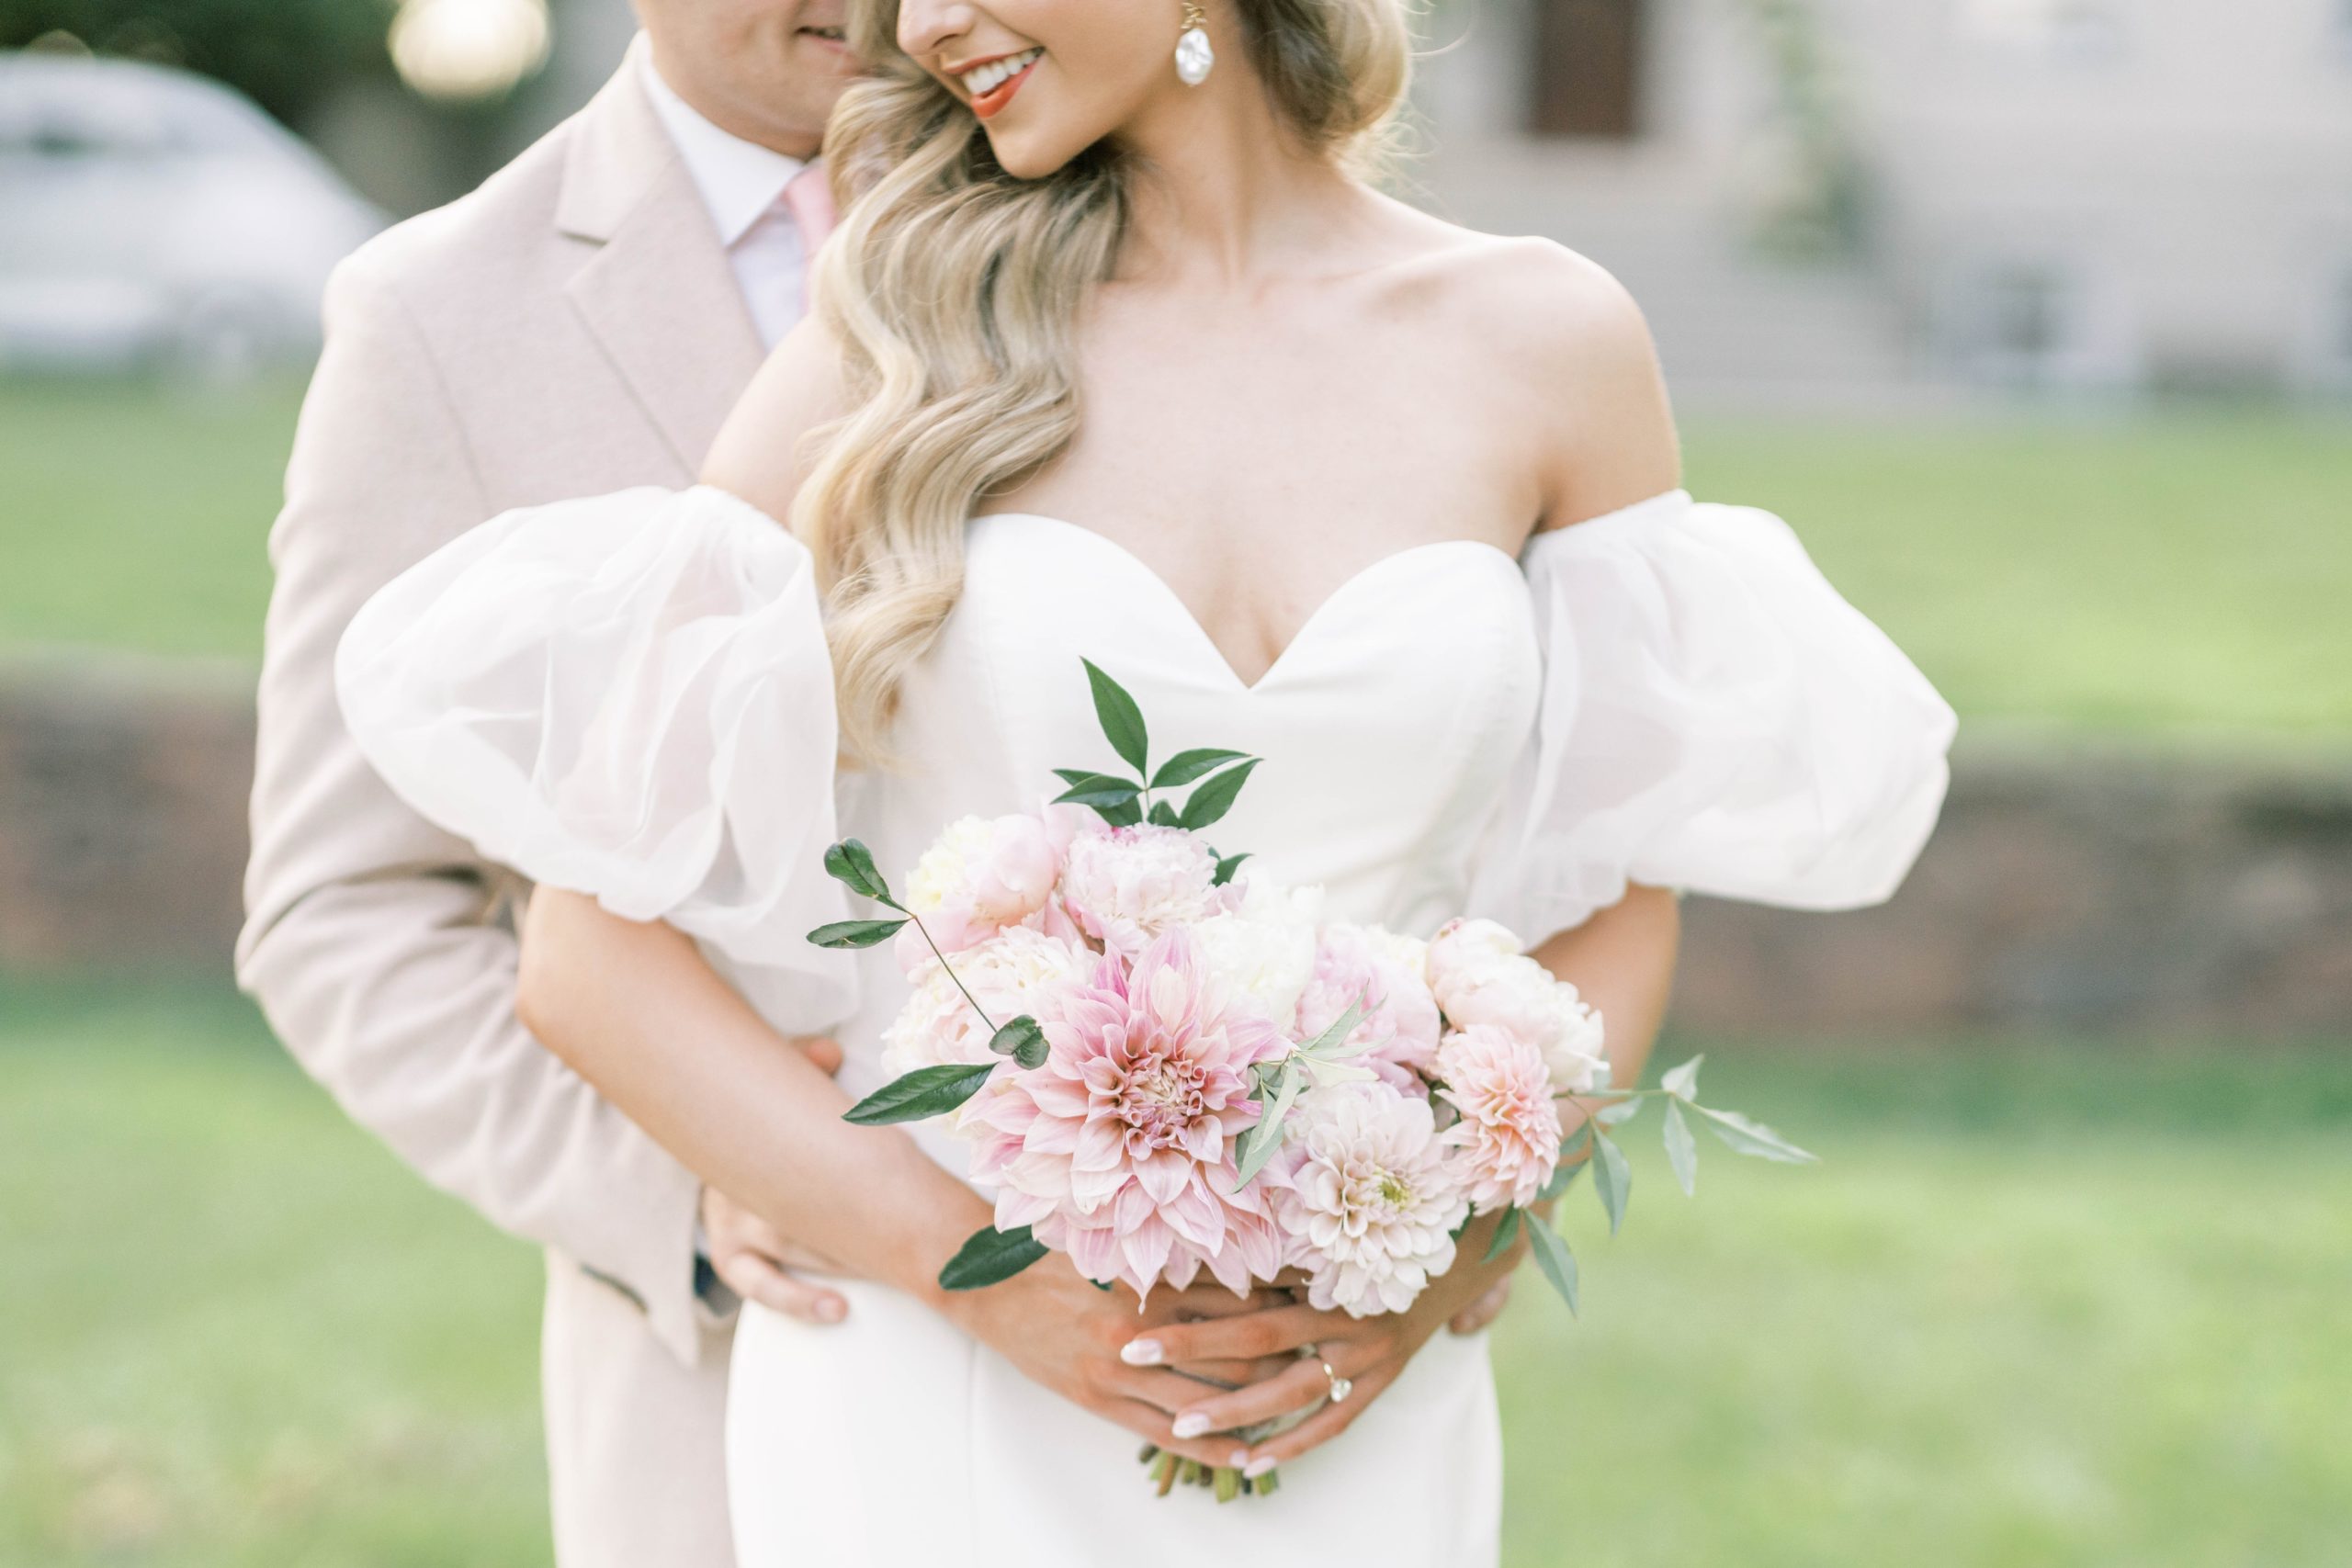 An elegant and classic Great Marsh Estate wedding in Bealeton, VA featuring a vintage car.